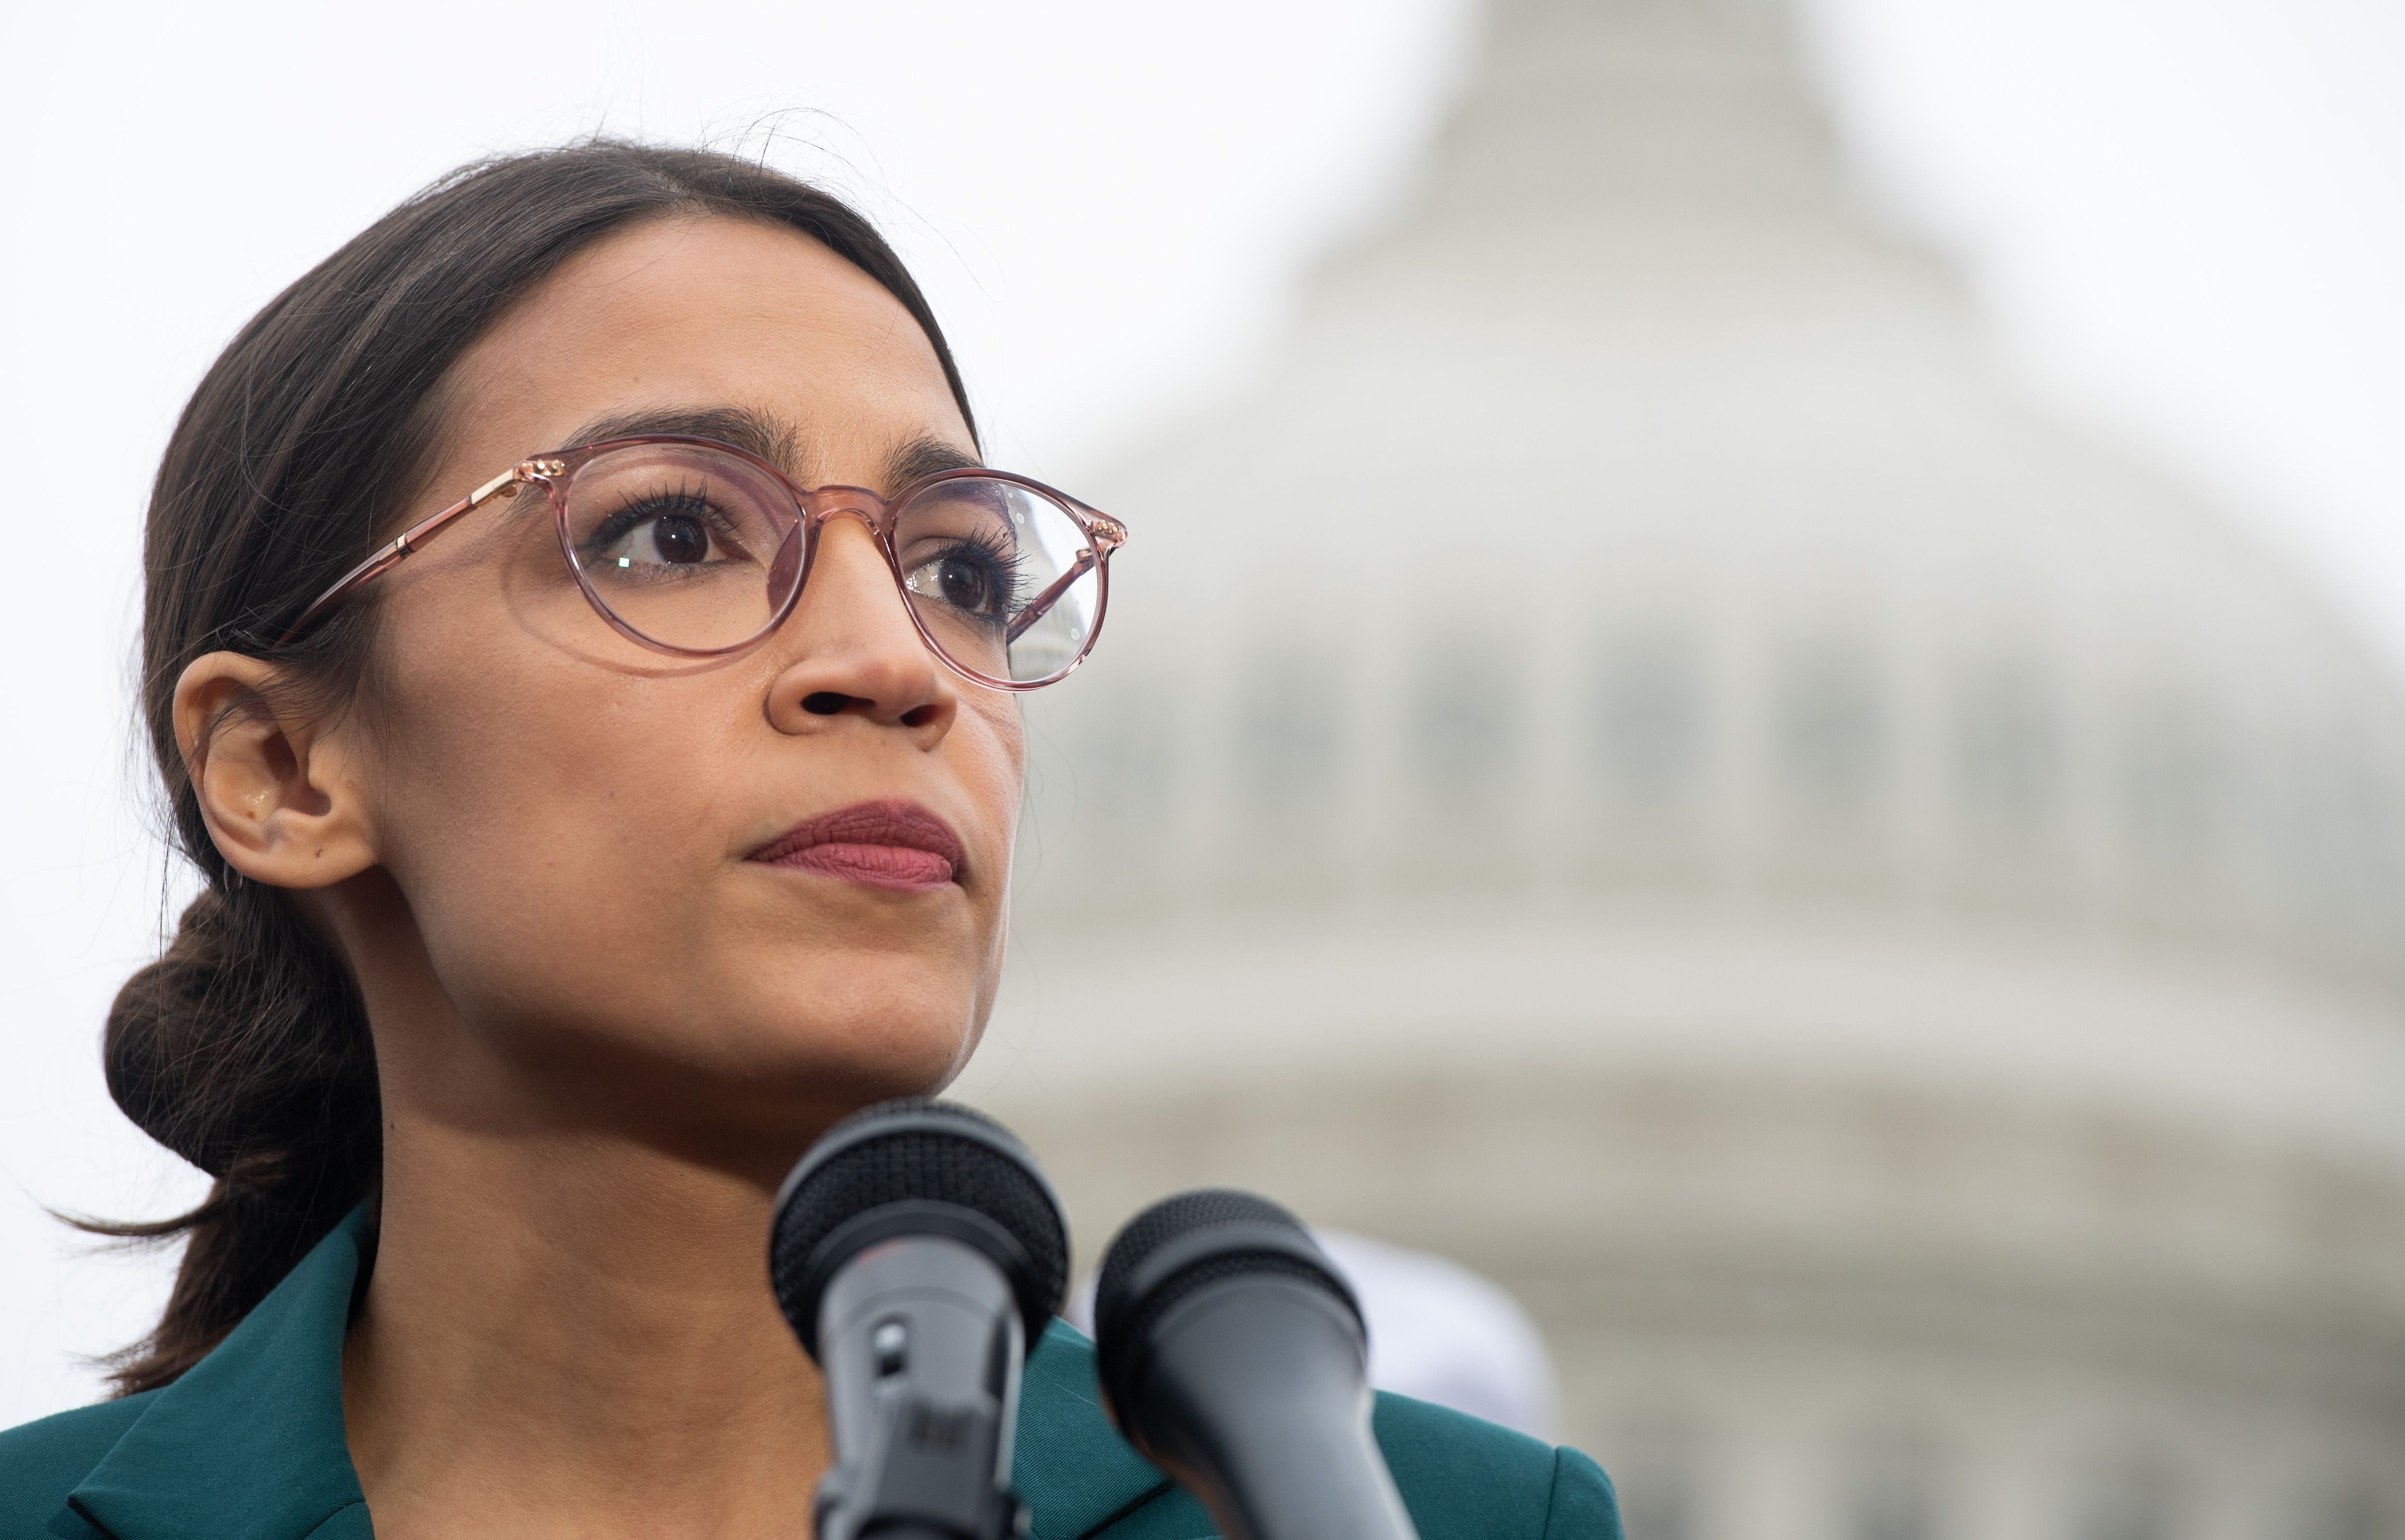 In this file photo taken on 7 February 2019, US representative Alexandria Ocasio-Cortez, Democrat of New York, speaks during a press conference to announce Green New Deal legislation to promote clean energy programs outside the US Capitol in Washington, DC